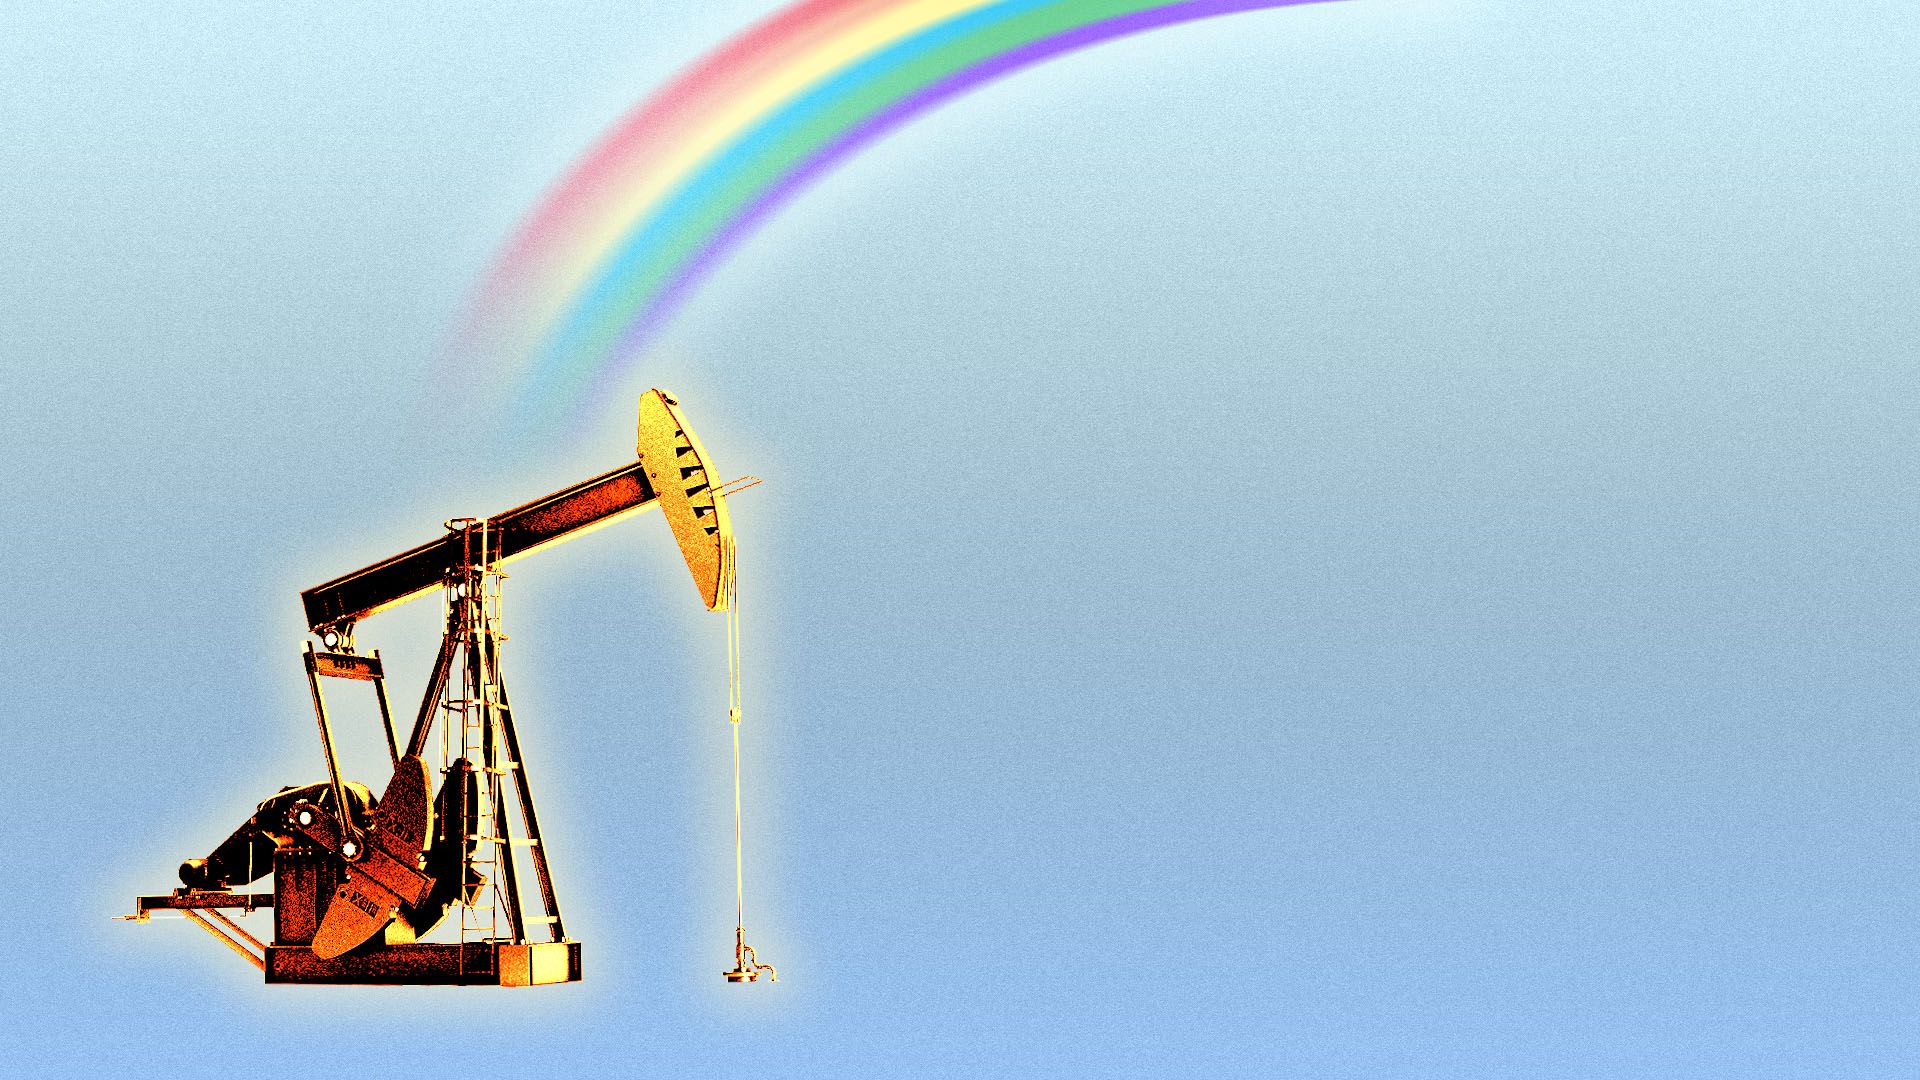 Illustration of a golden oil rig at the end of a rainbow